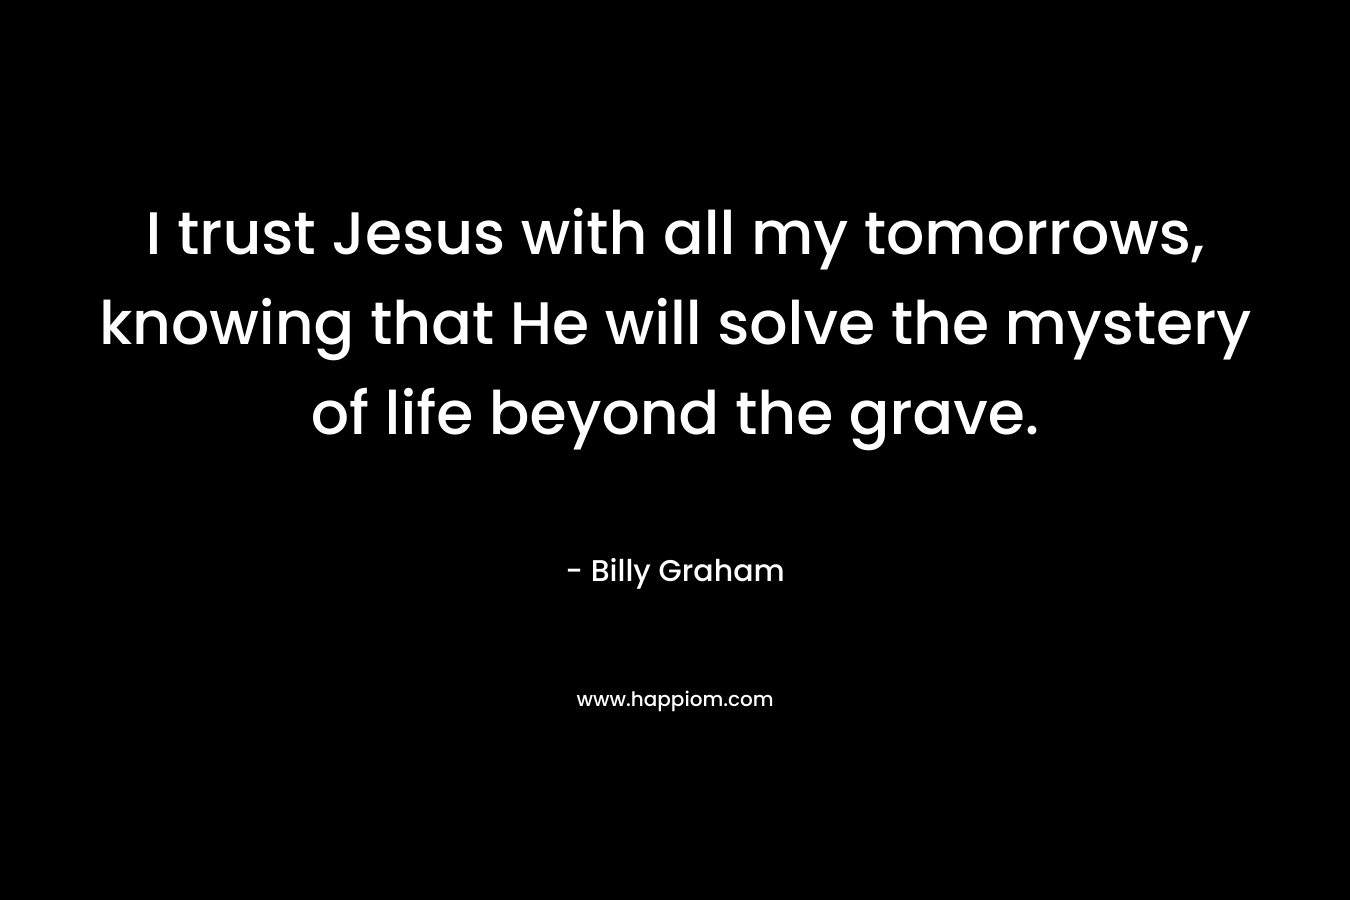 I trust Jesus with all my tomorrows, knowing that He will solve the mystery of life beyond the grave.